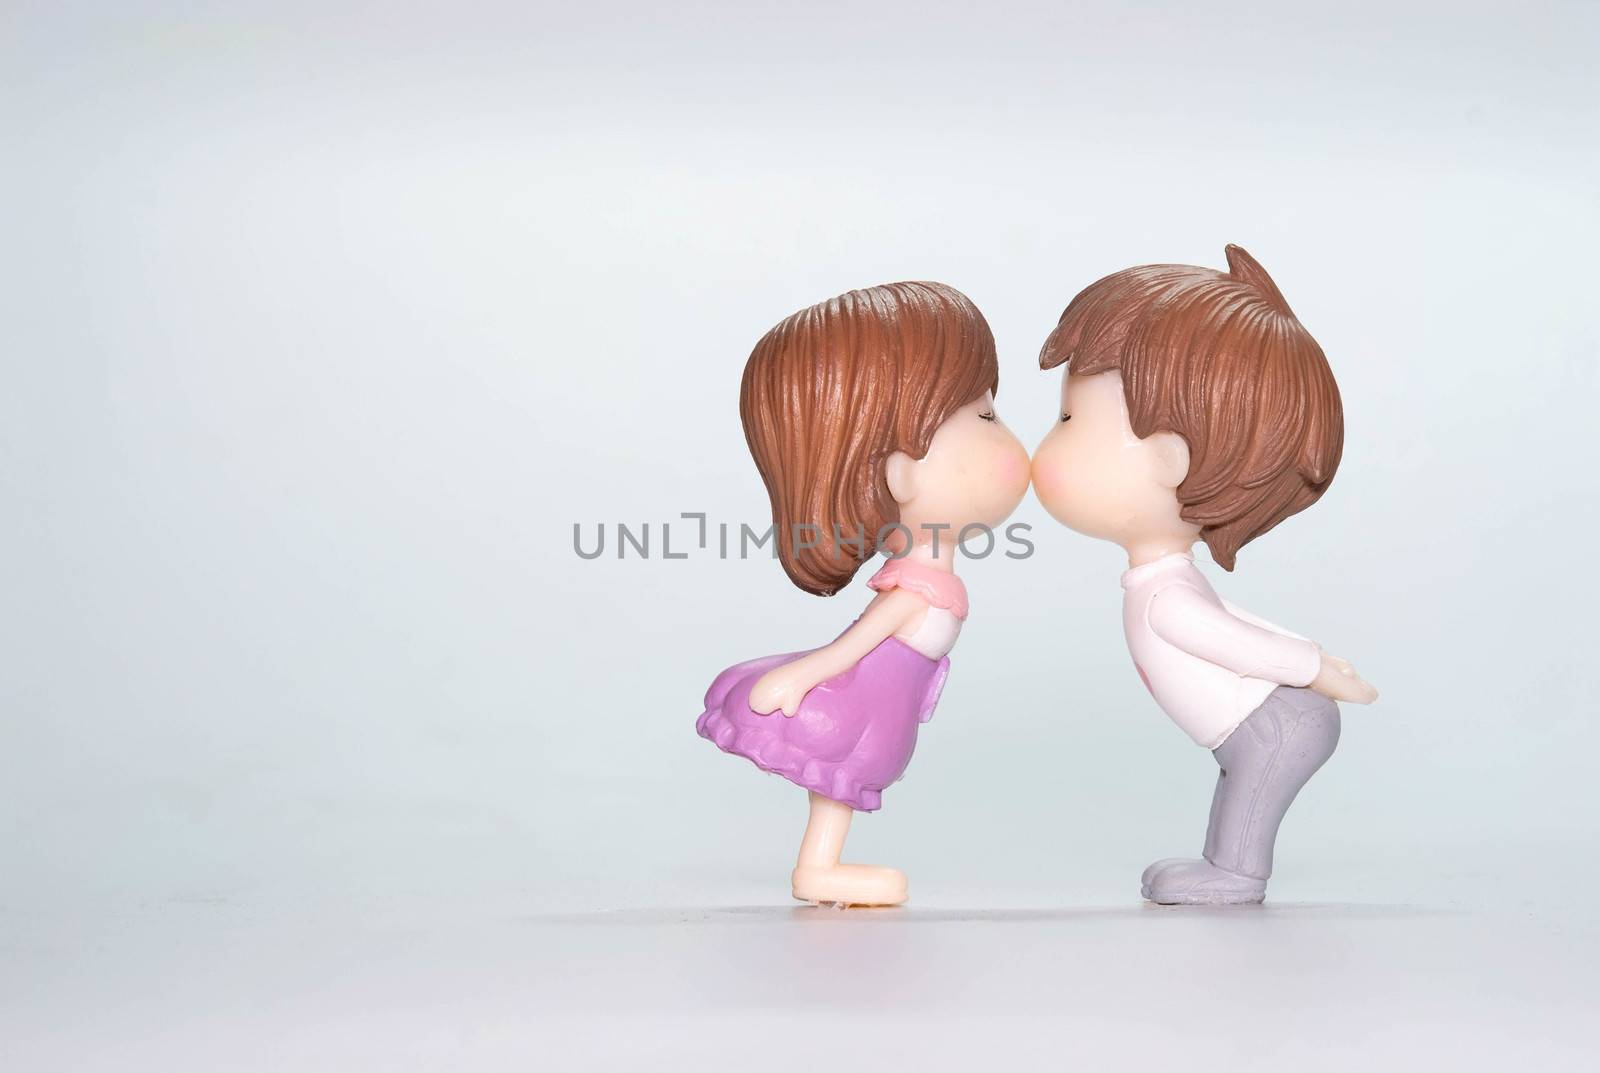 The Miniature doll of couple boy and girl kiss  isolate on White by Bonn2210